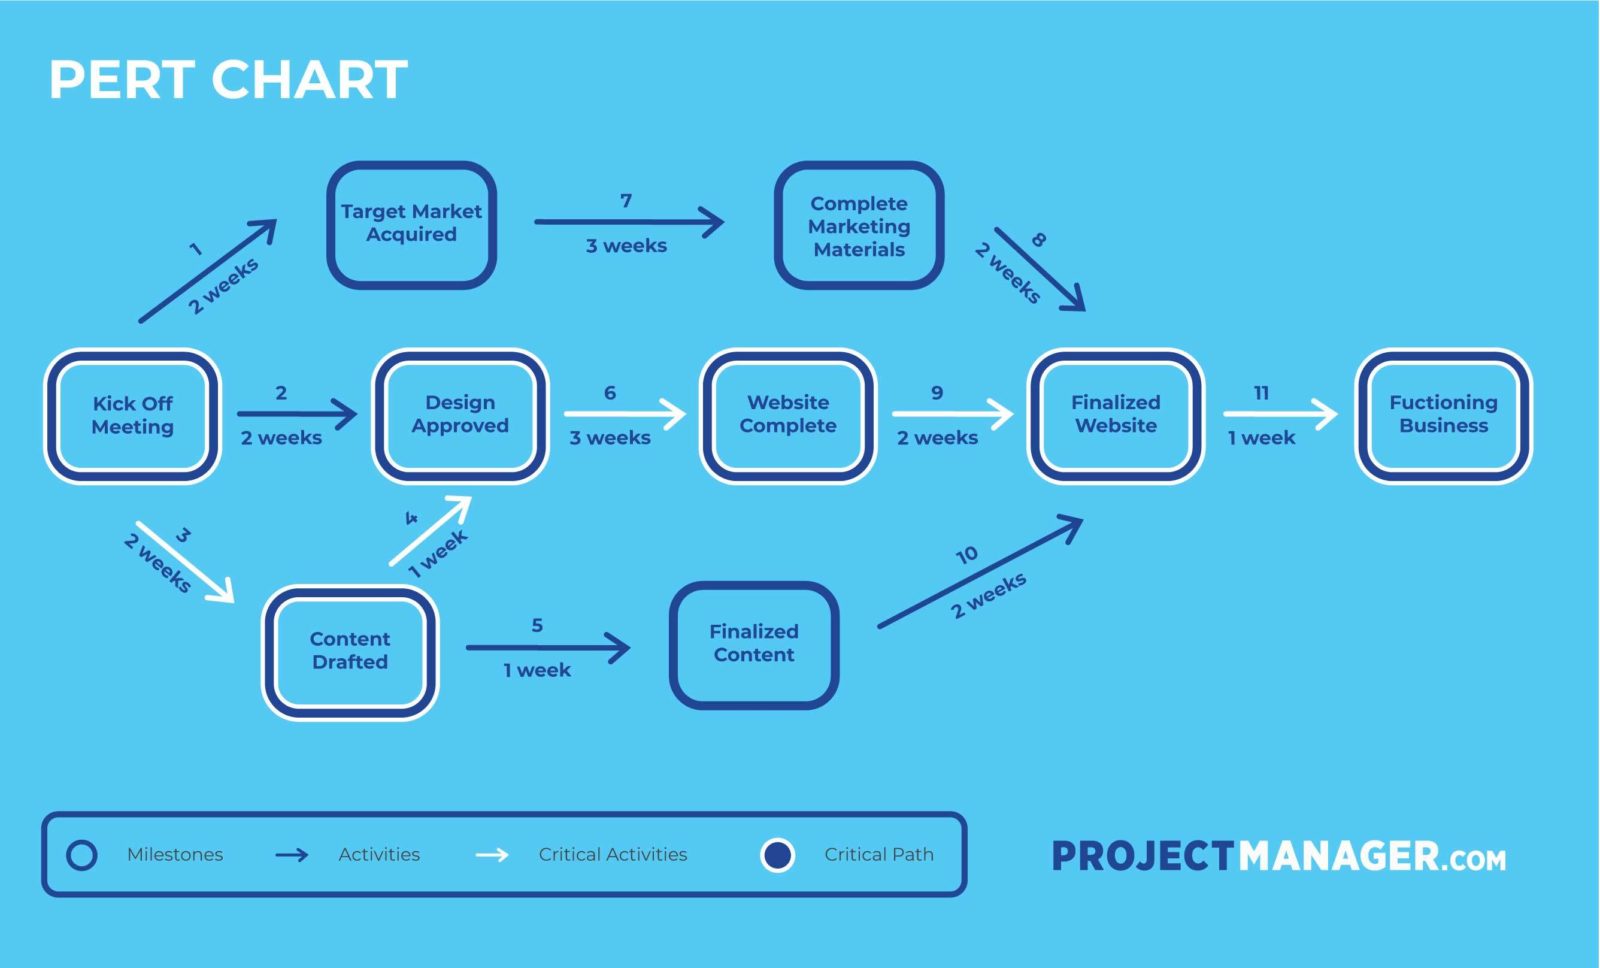 How to Make a Project Network Diagram (Free Tools Examples Included